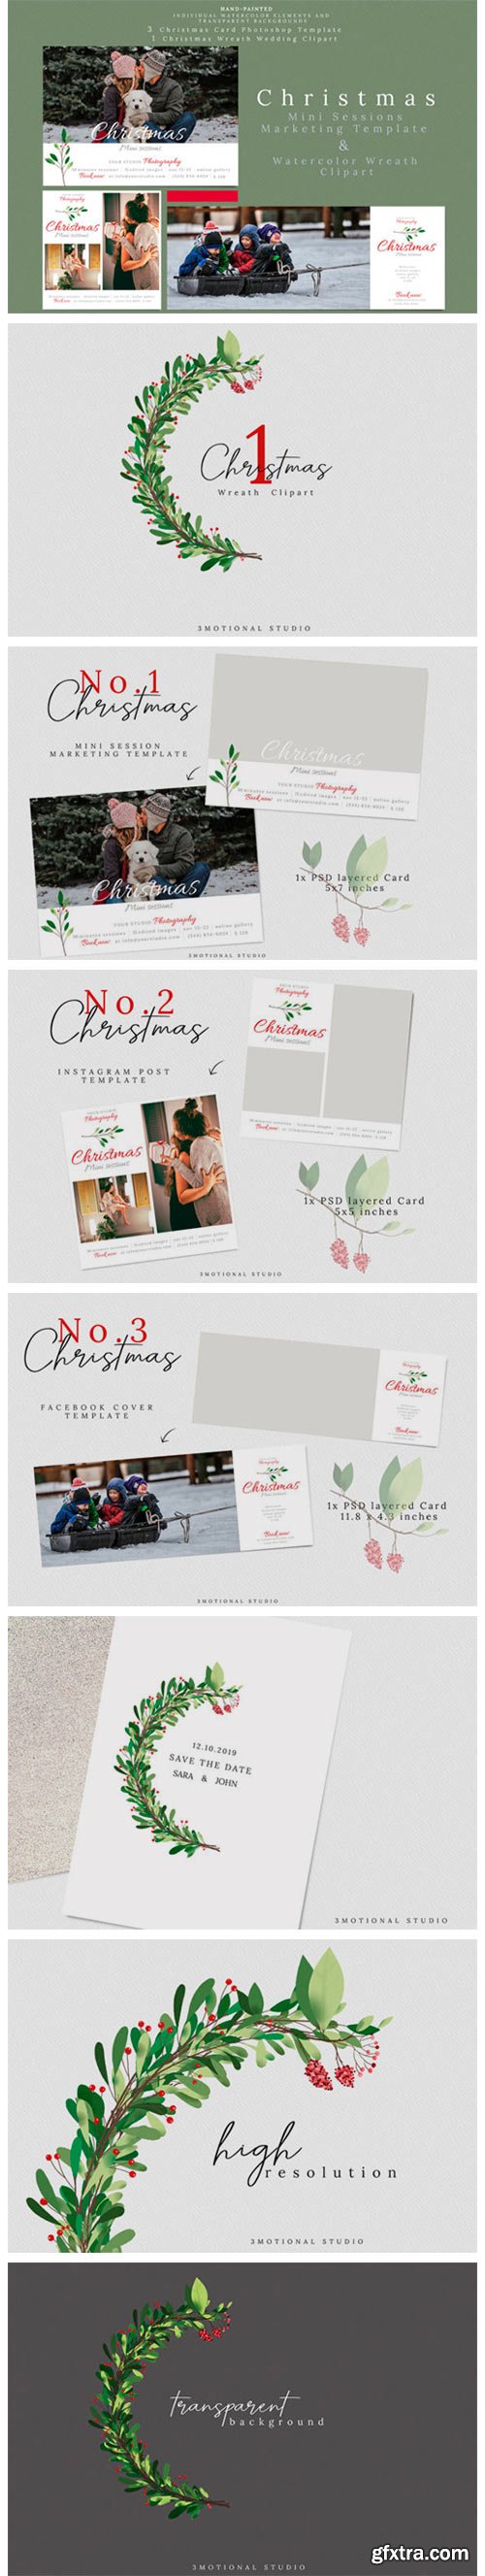 Holiday Mini Sessions Marketing Template 2217936